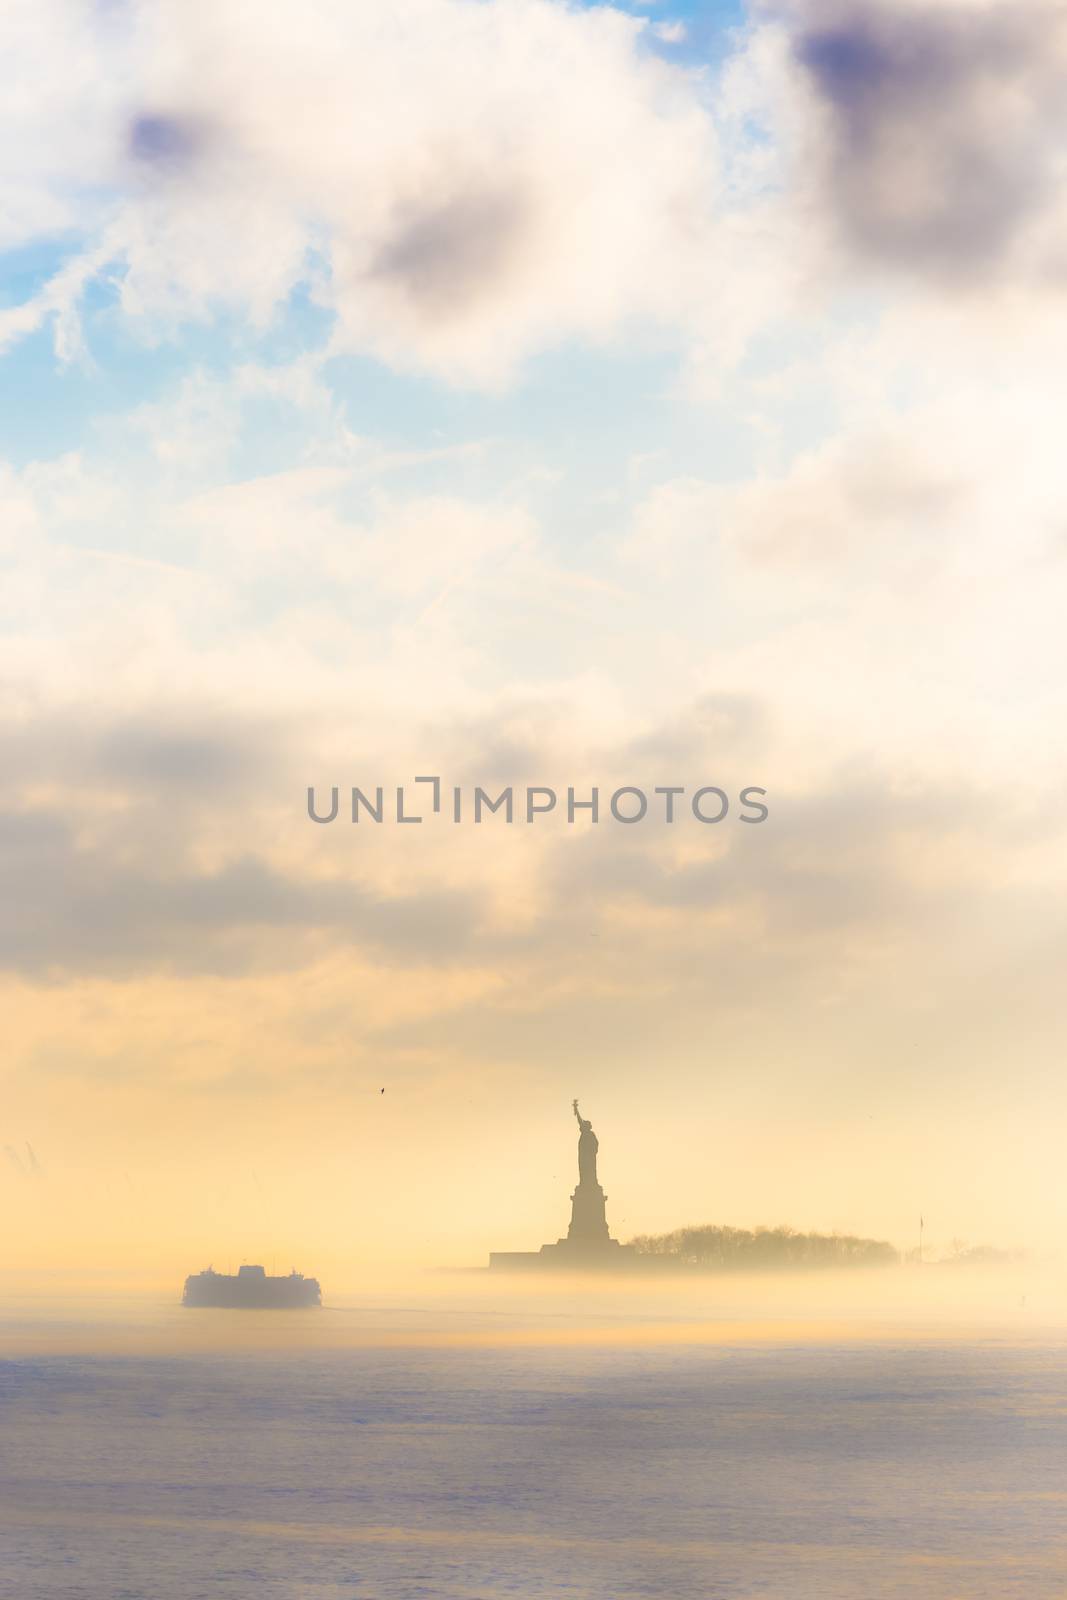 Staten Island Ferry and Statue of Liberty. by kasto